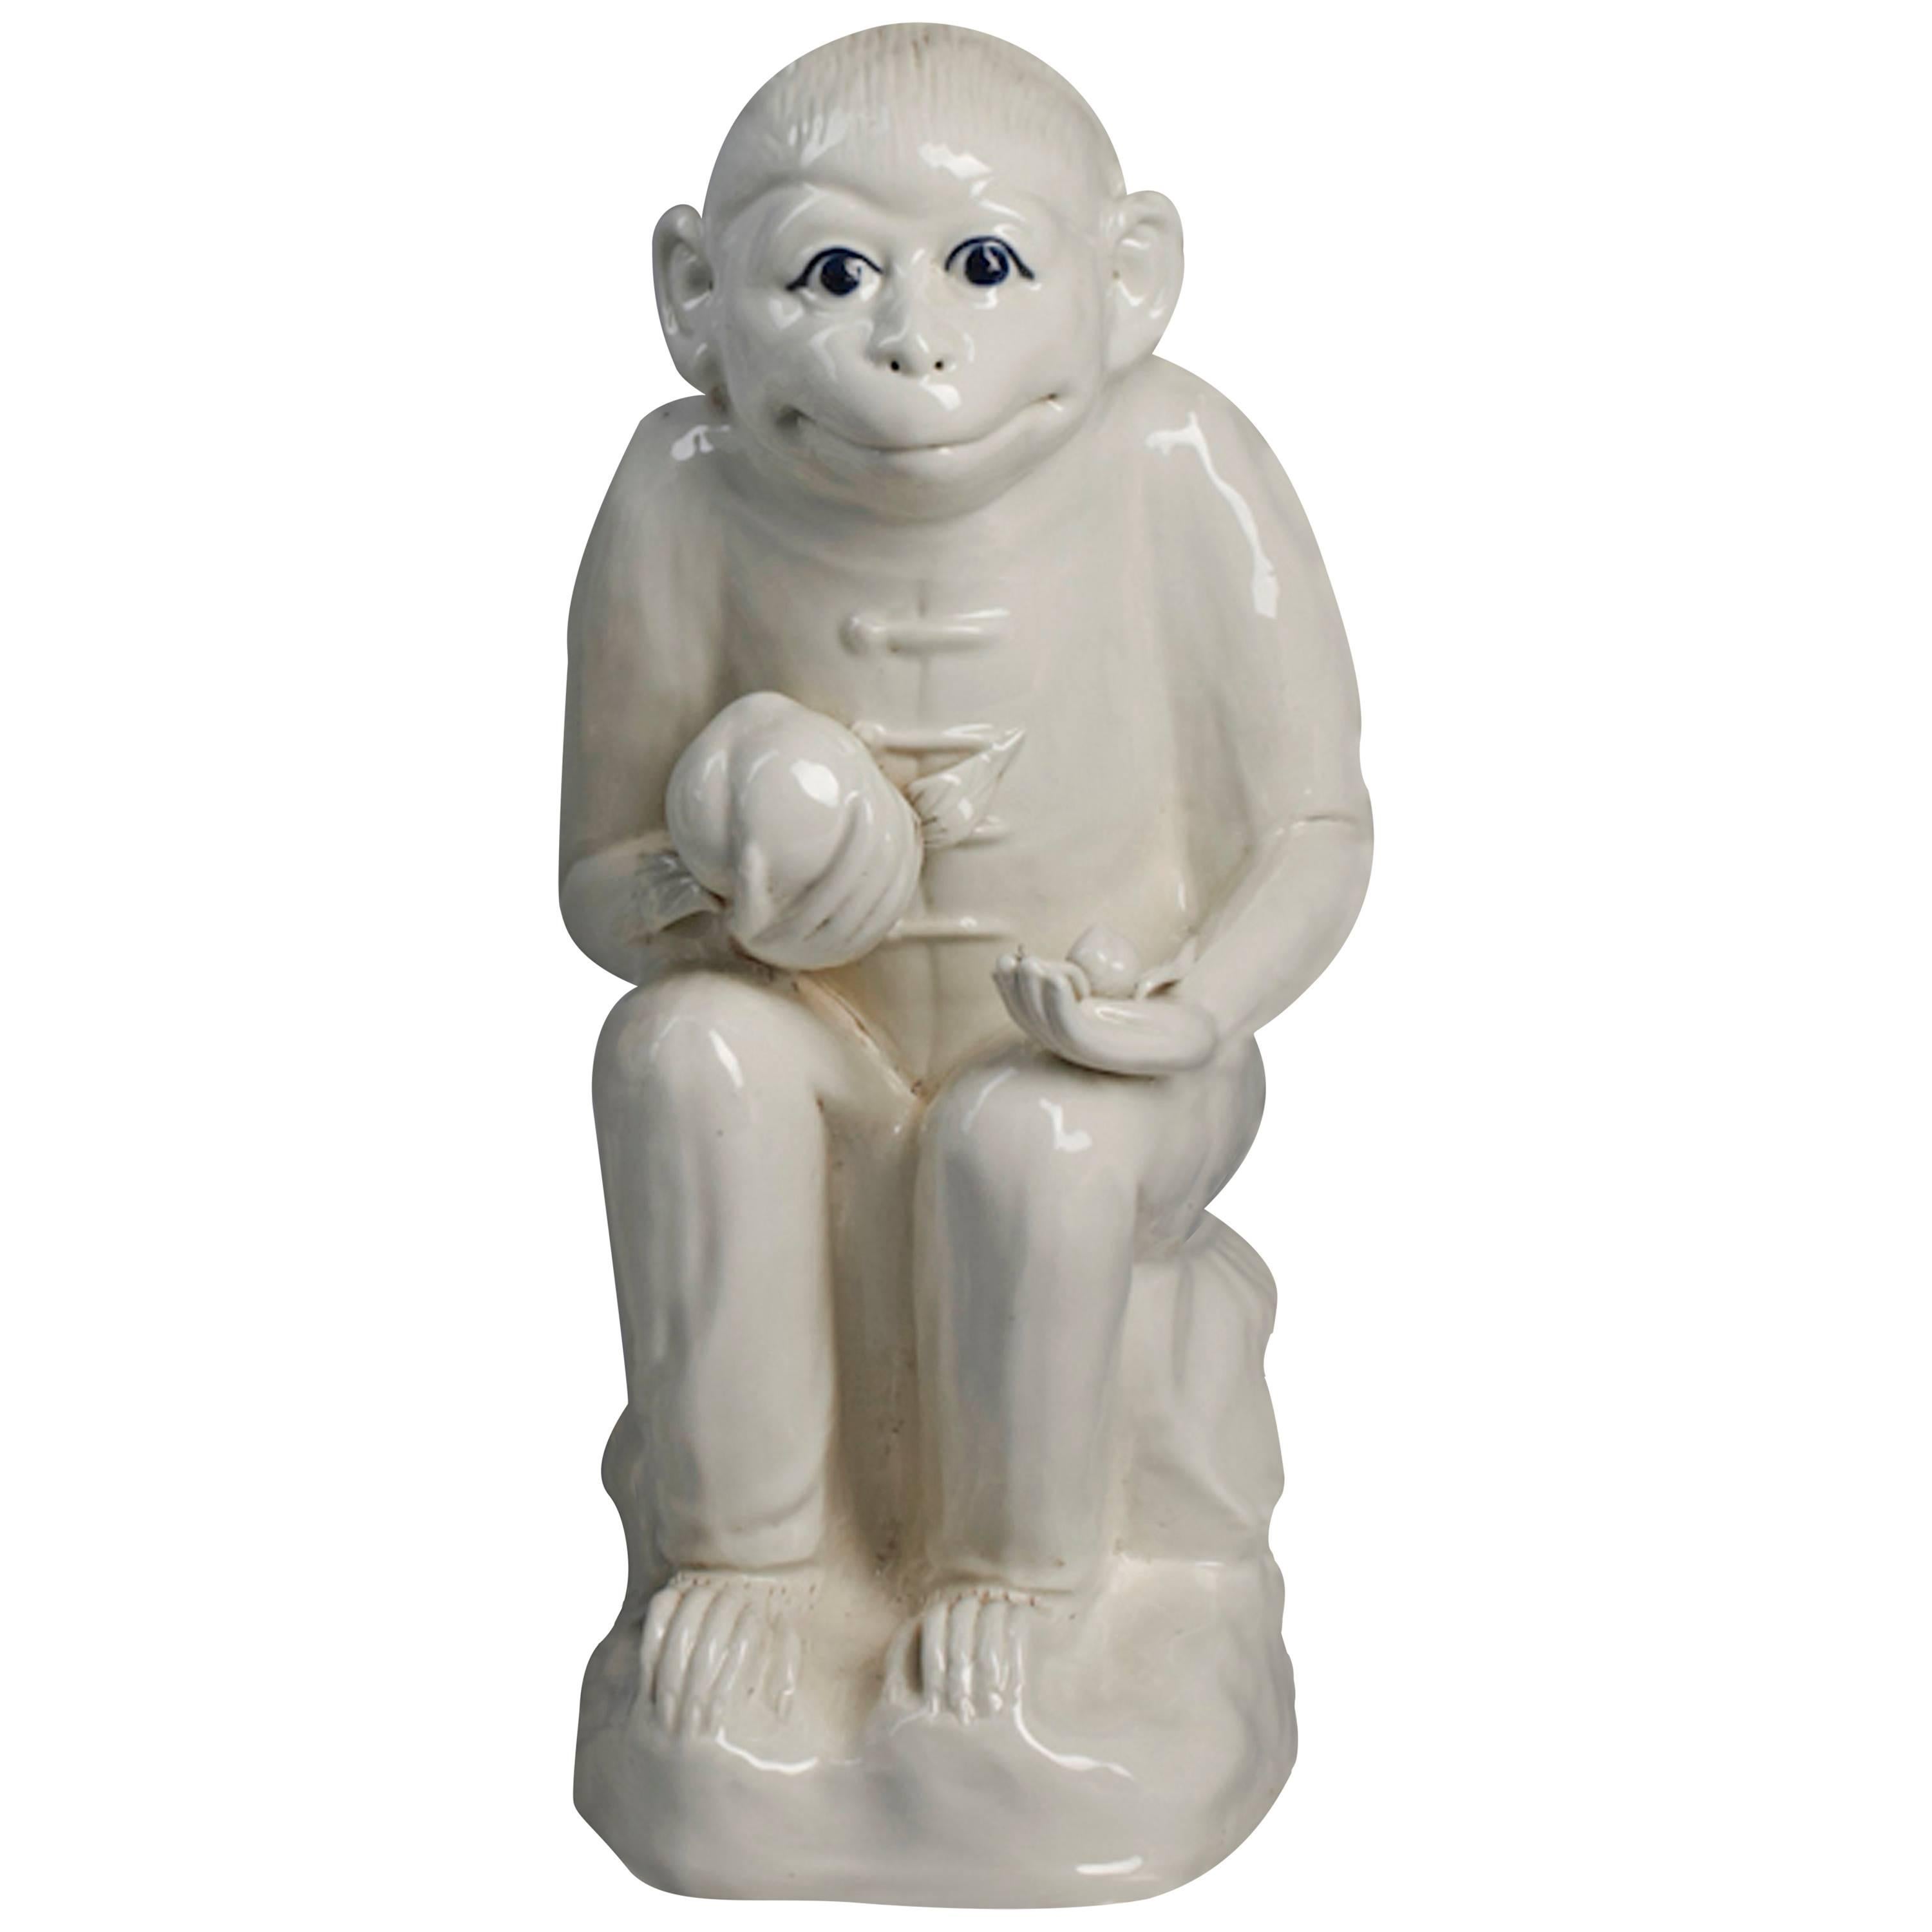 White Porcelain Monkey in a Suit